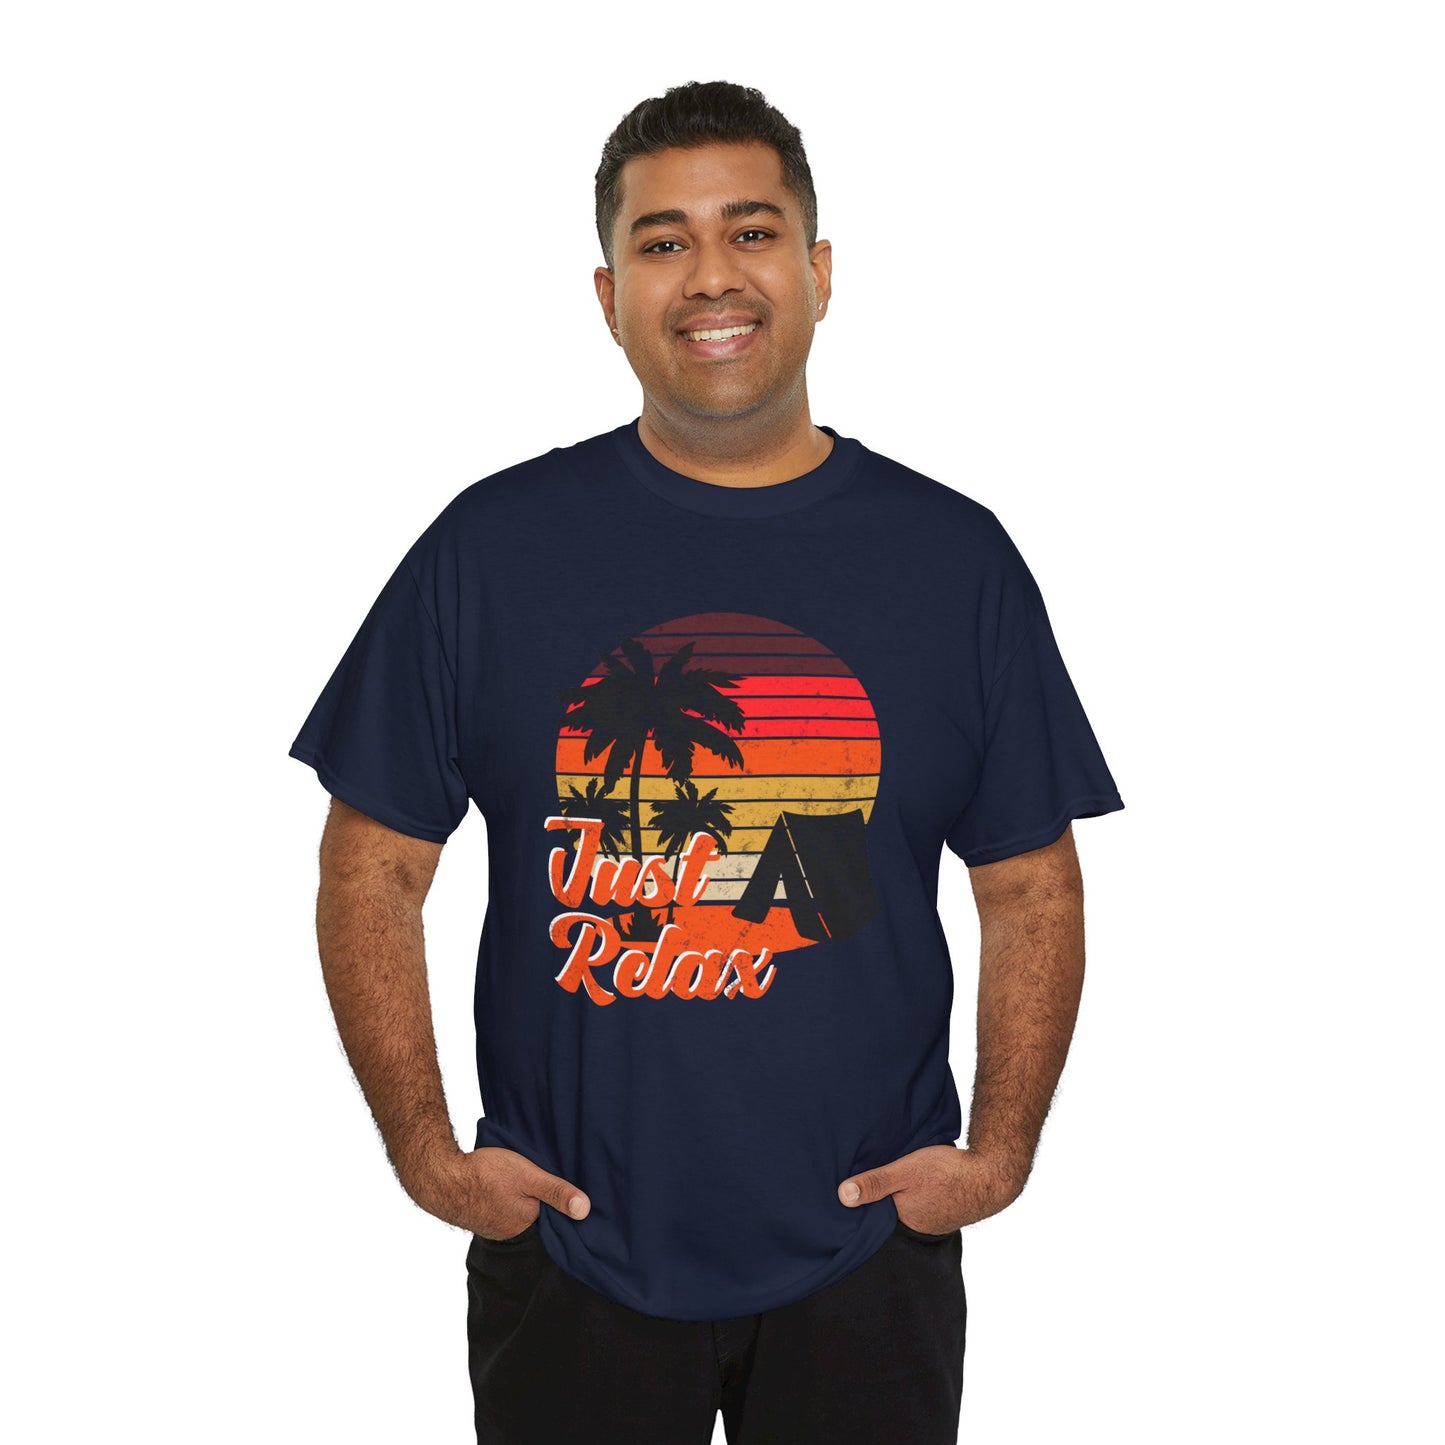 T-shirt - "Just Relax" Heavy Cotton Tee, 100% Cotton, Classic Fit, Runs True to Size, Sizes Small - 3XL